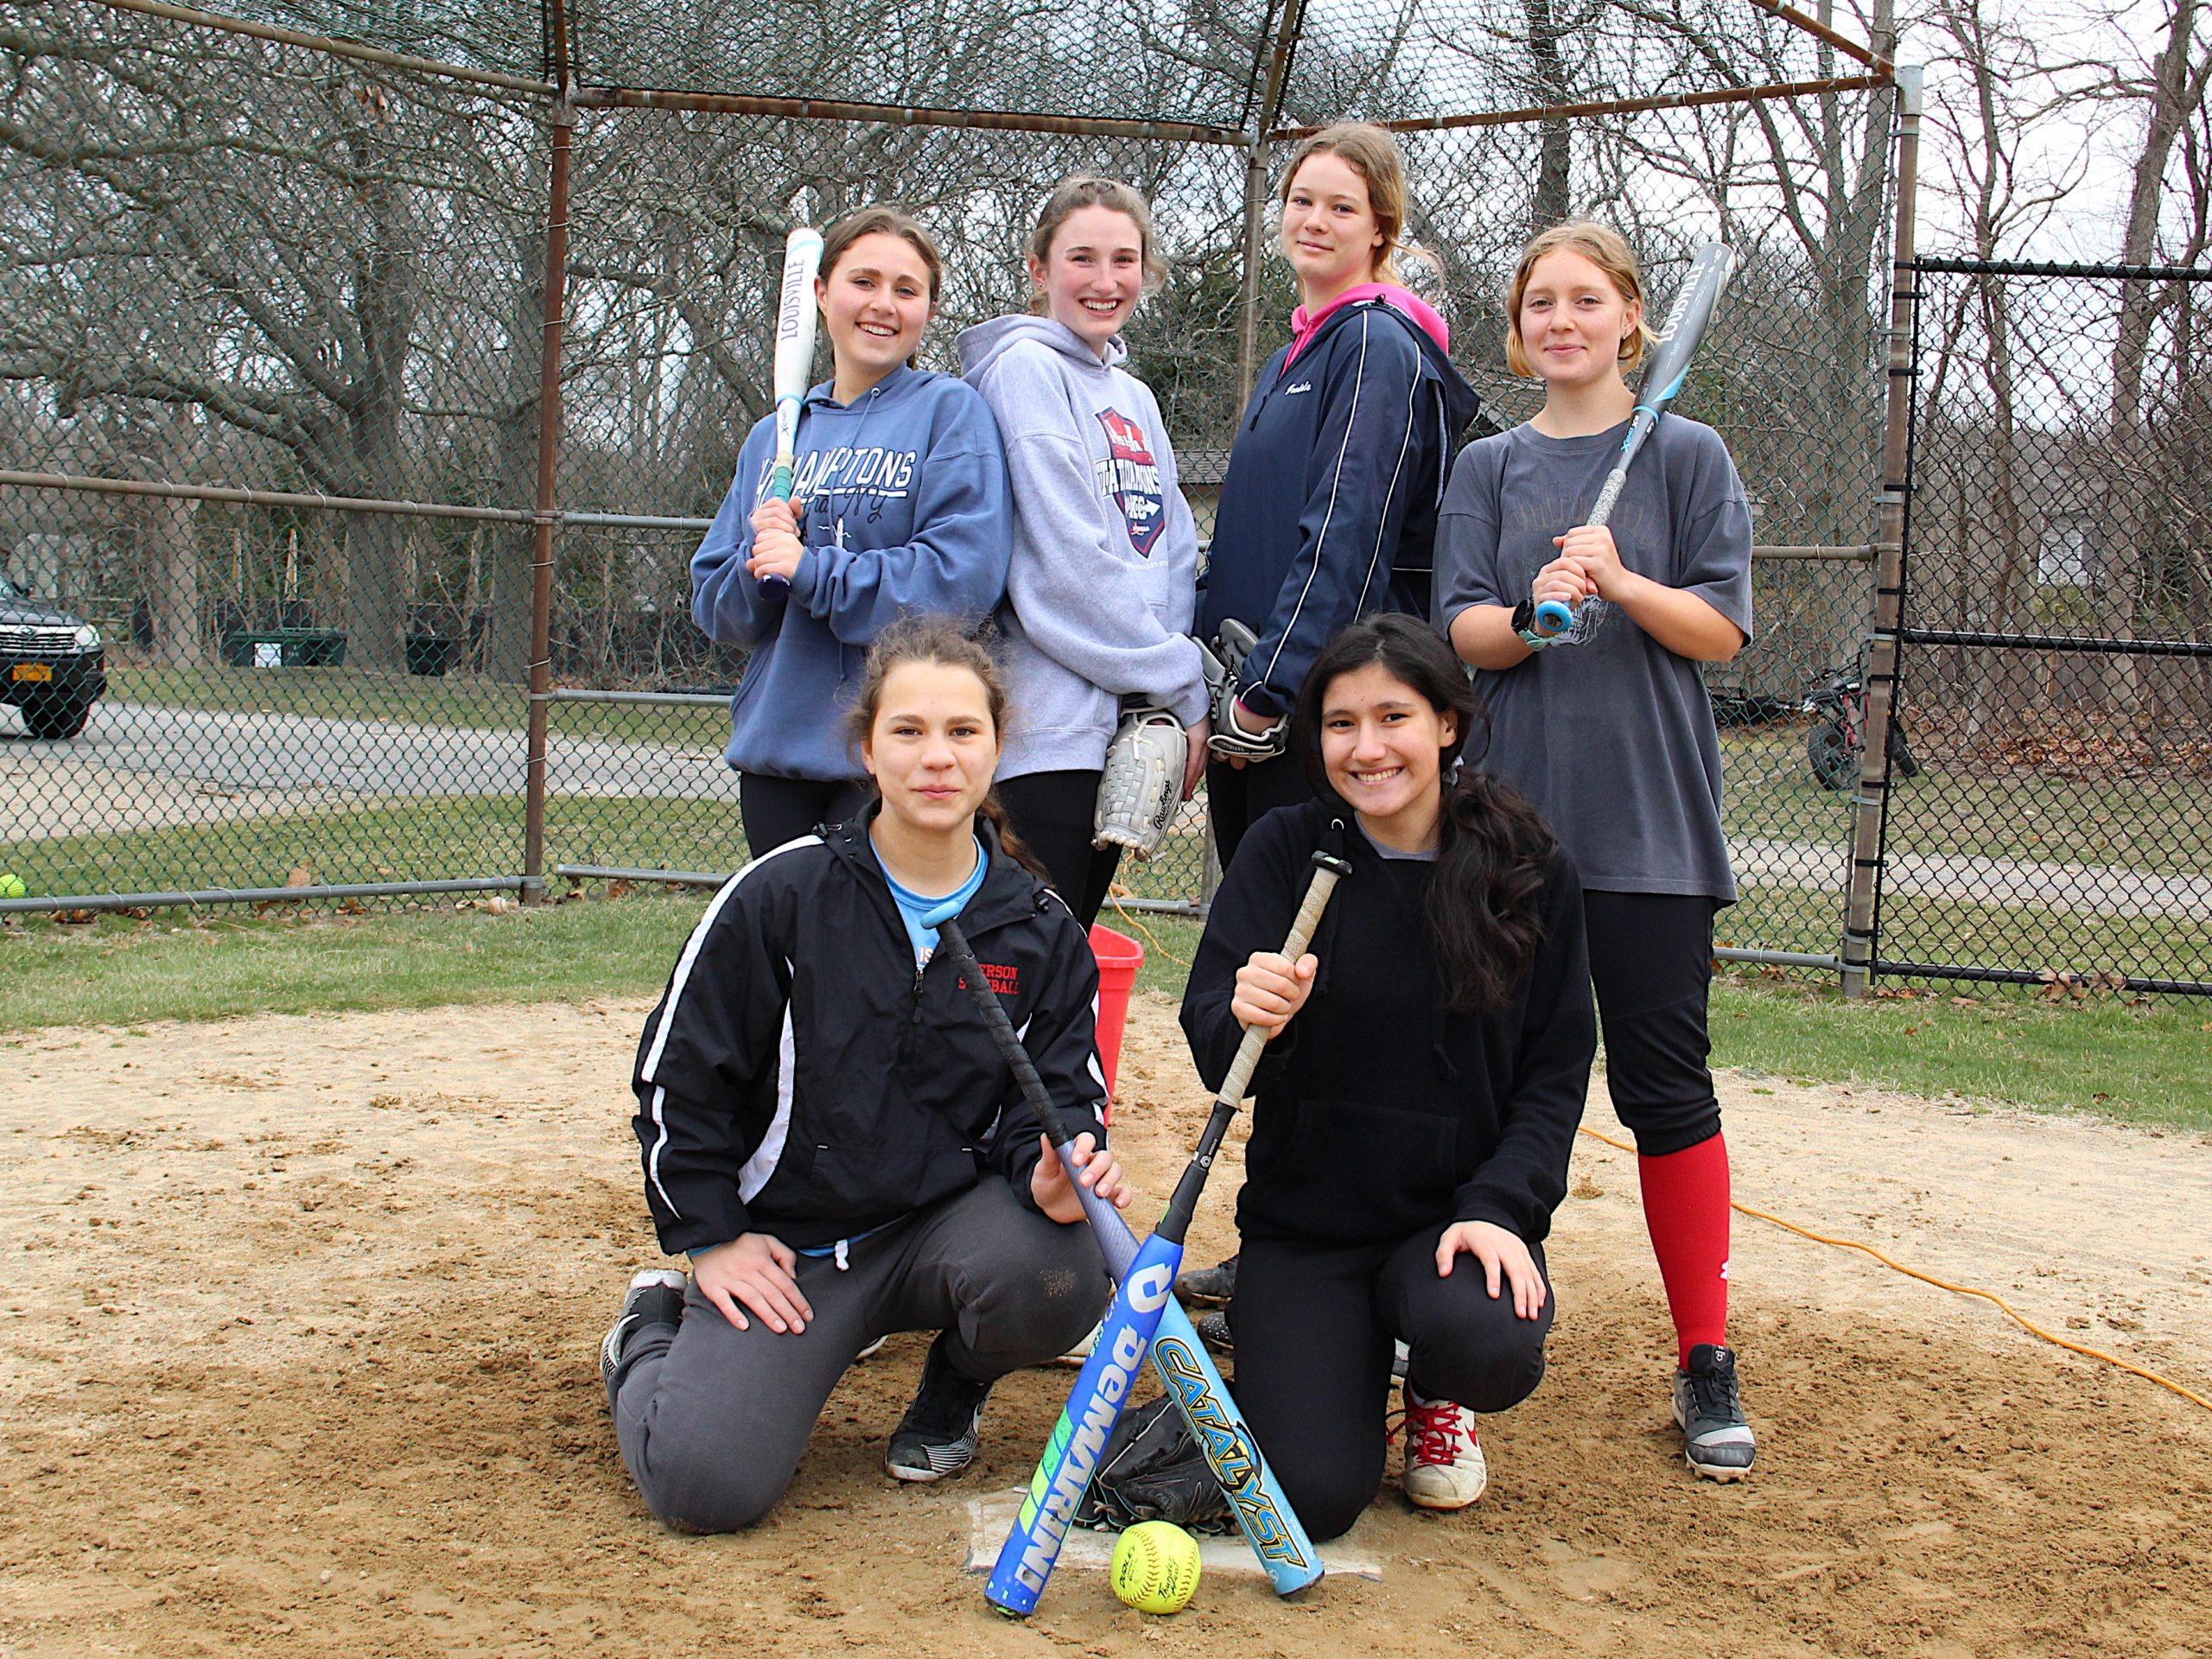 Pierson's returning players include, from top left, Micky Wilson, Abby Sherwood, Fionnuala Goodale and Hannah Ramundo; from bottom left, Ashley Weatherwax and Ava Garabedian.   KYRIL BROMLEY